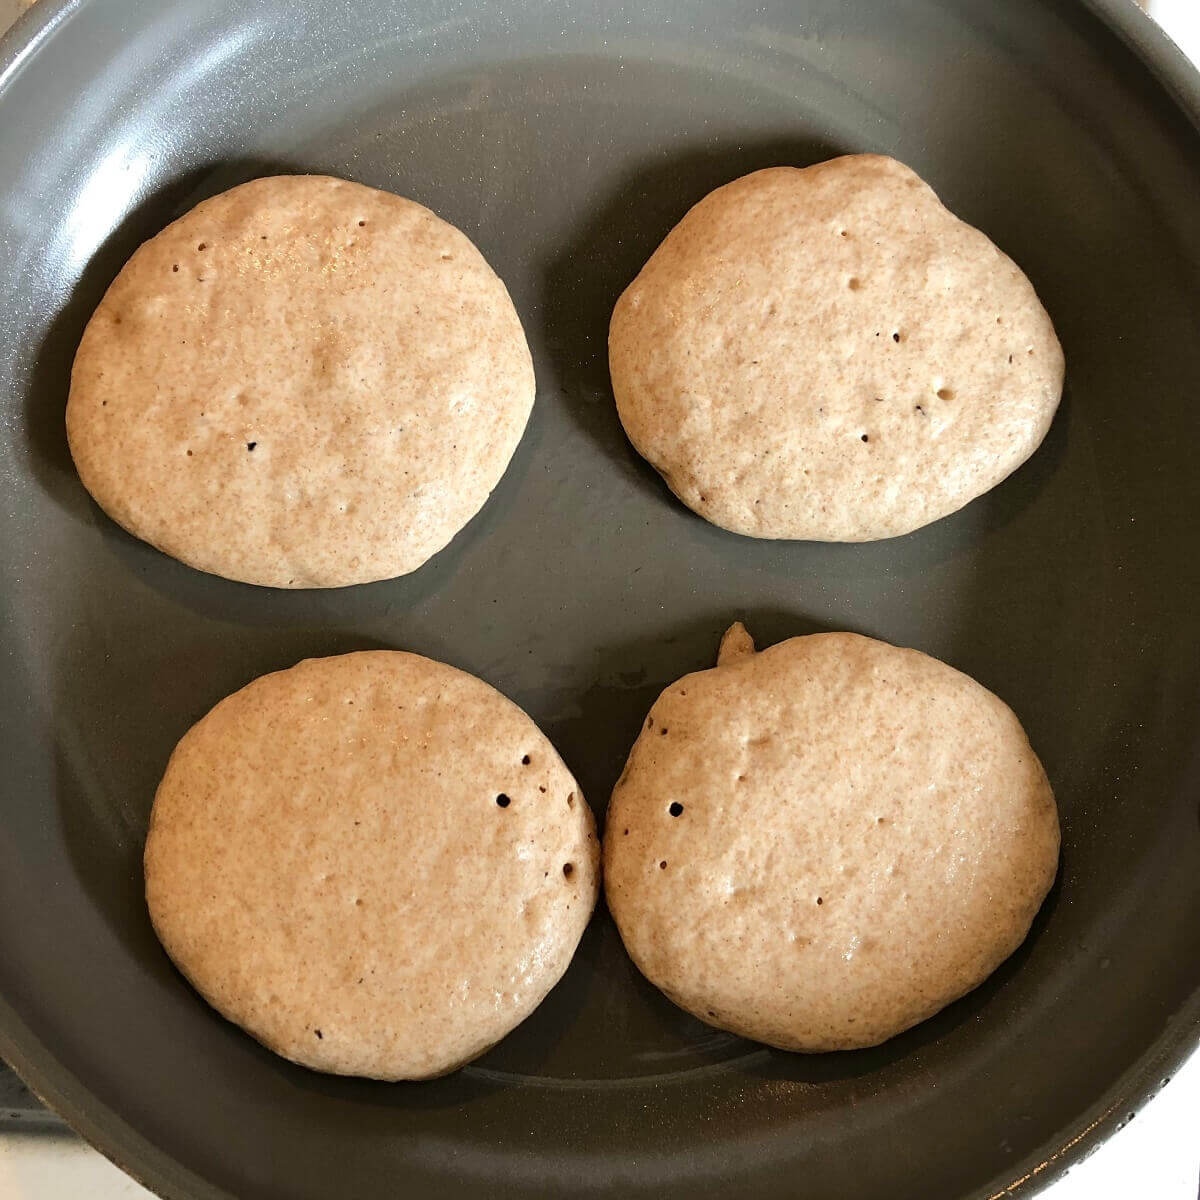 Four pancakes cooking in a frying pan.